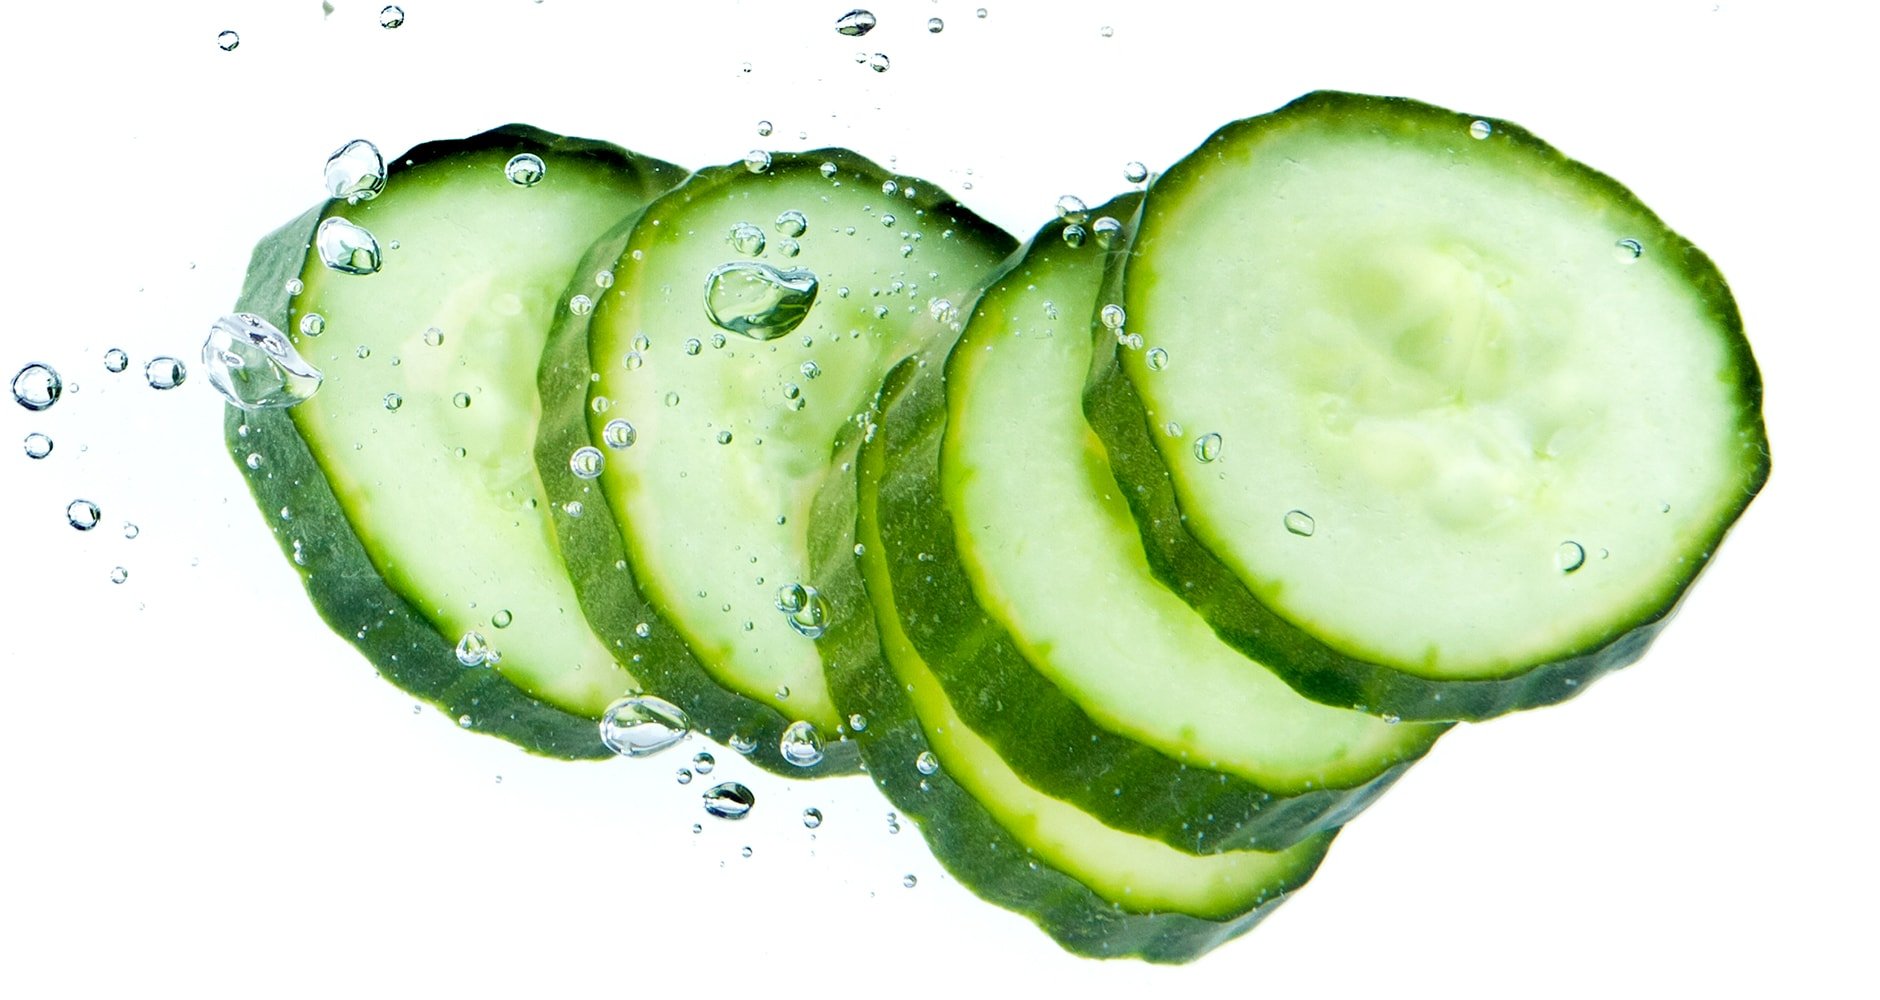 Cucumbers To The Rescue! - Farmers' Almanac - Plan Your Day. Grow Your Life.